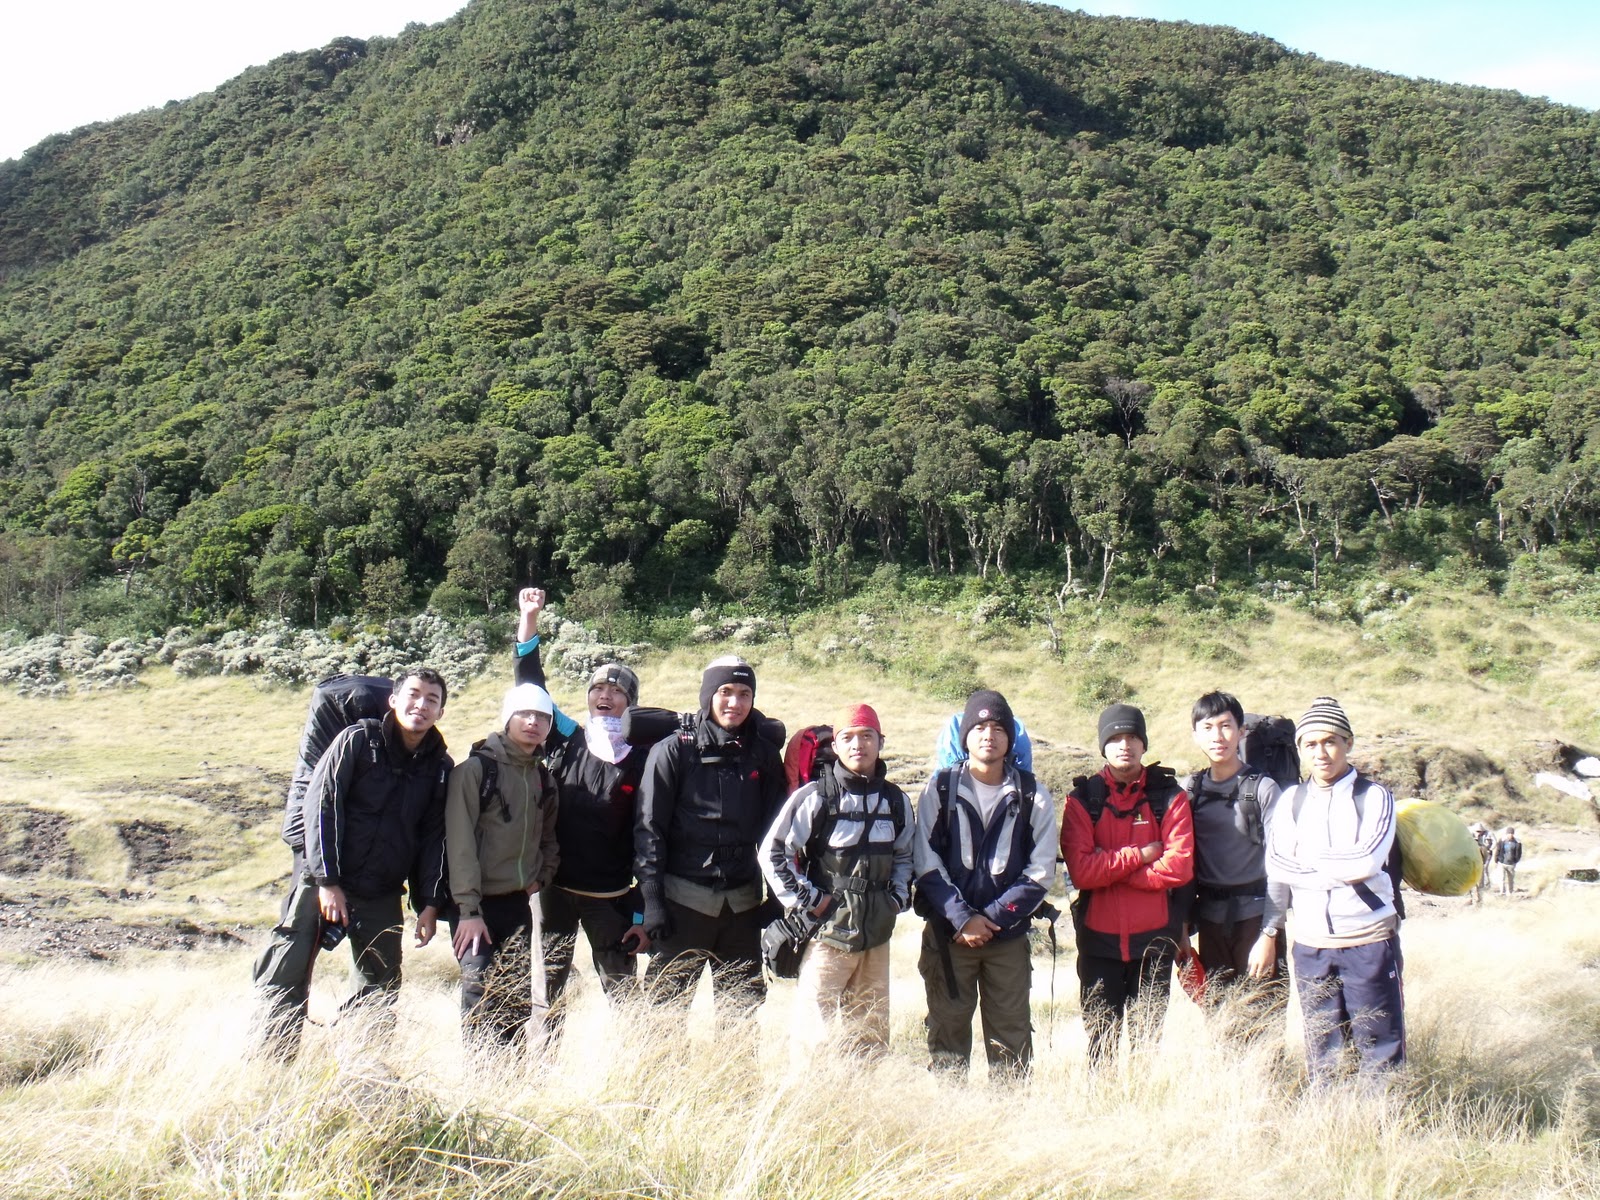 My Adventure: Gunung Gede - The Picture